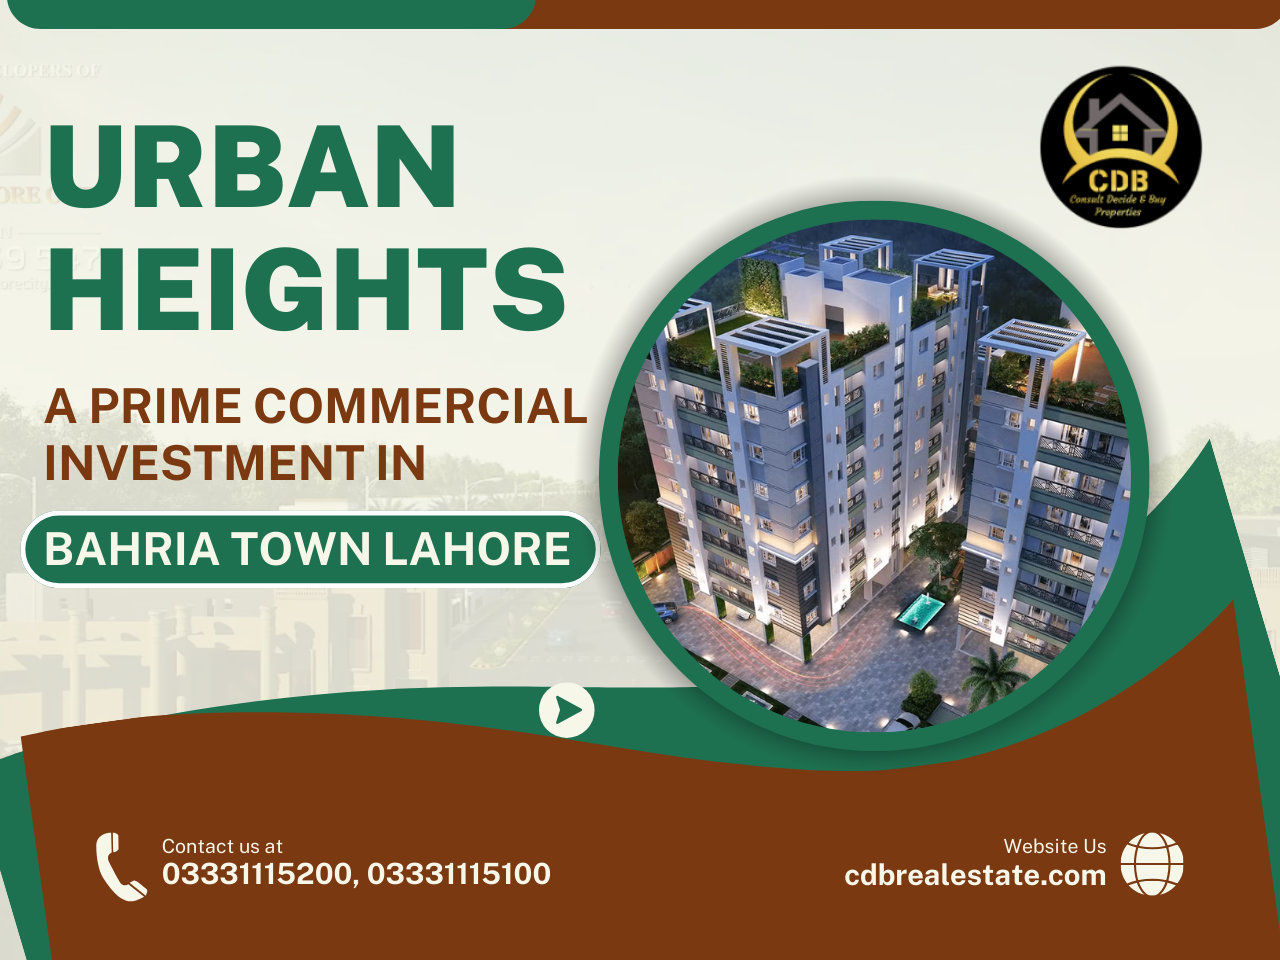 Urban Heights: A Prime Commercial Investment in Bahria Town Lahore